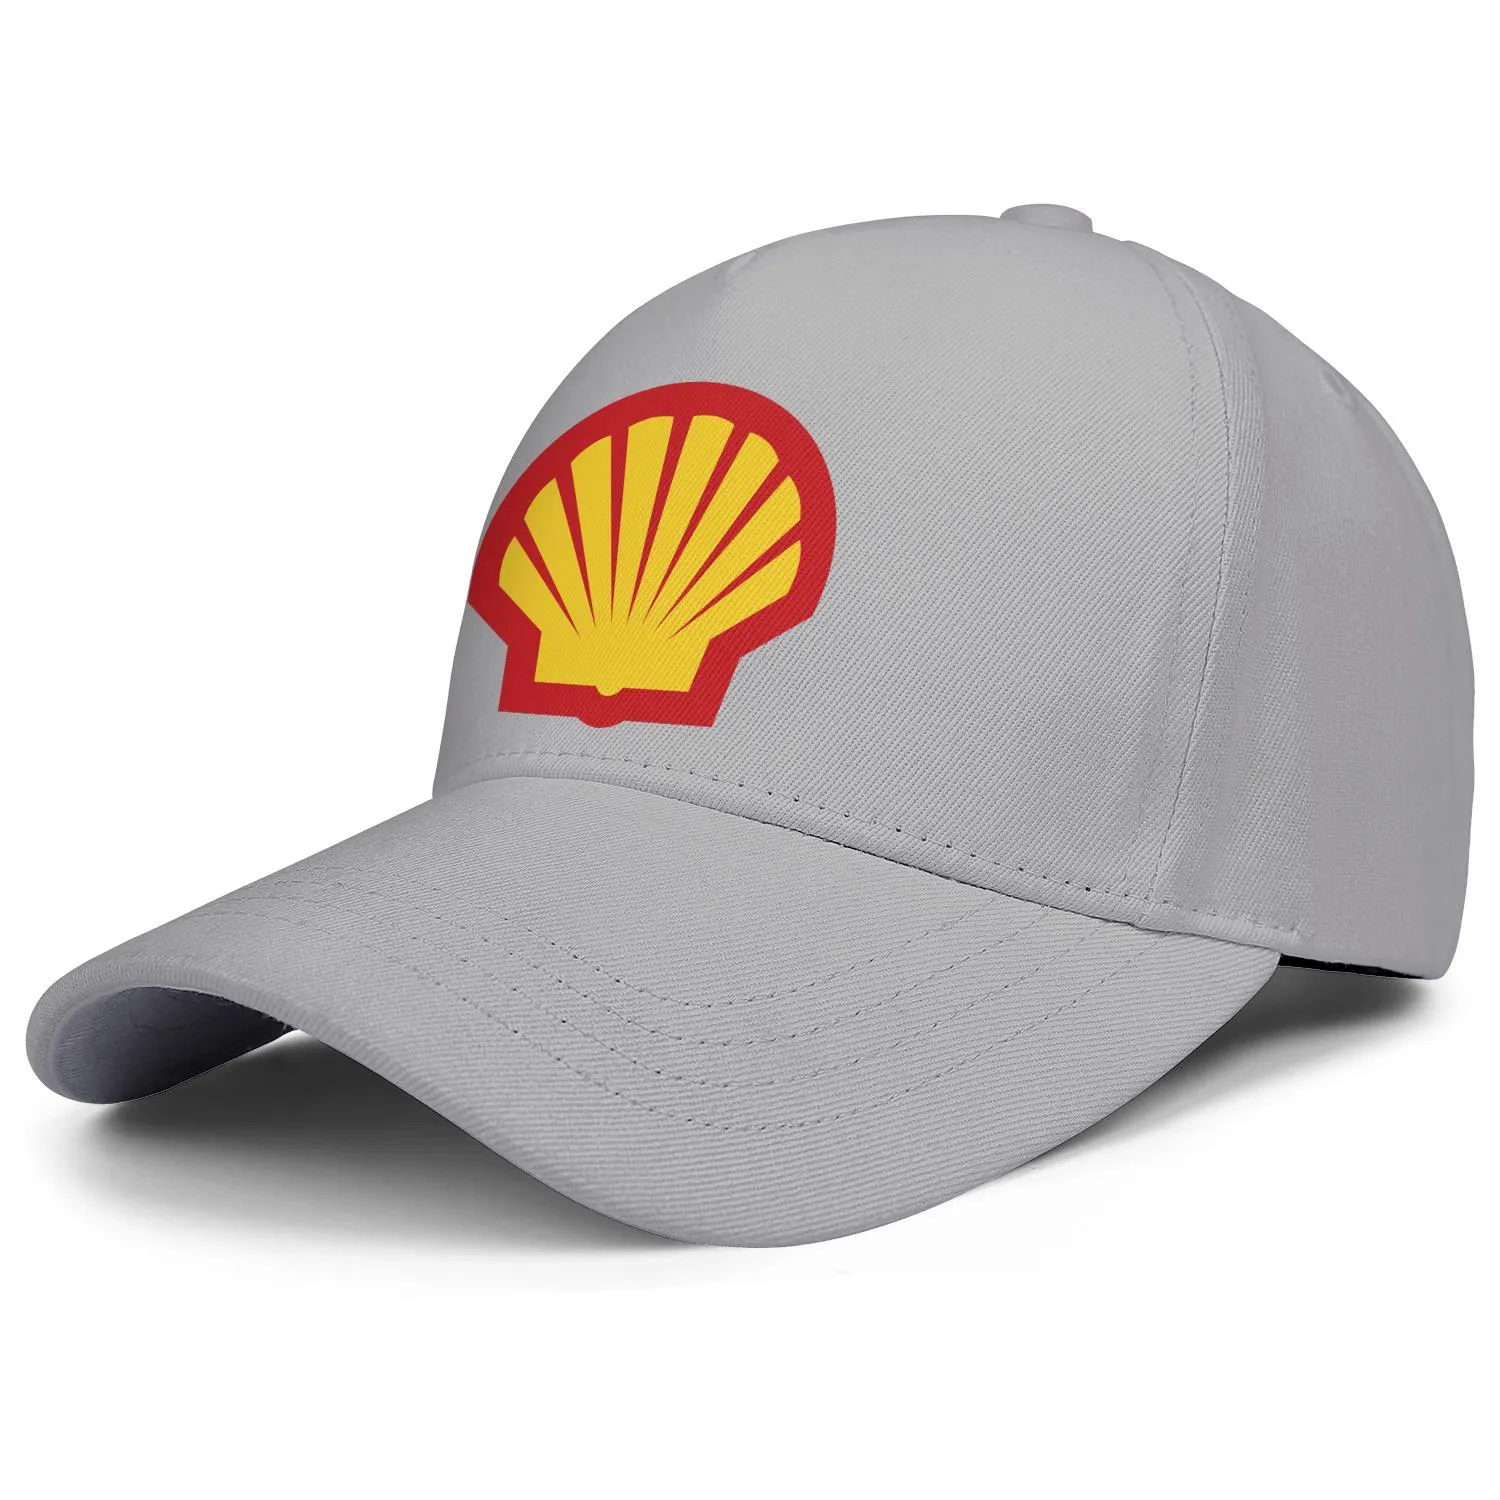 Shell gasoline gas station logo mens and women adjustable trucker cap fitted vintage cute baseballhats locator Gasoline symbo8137748